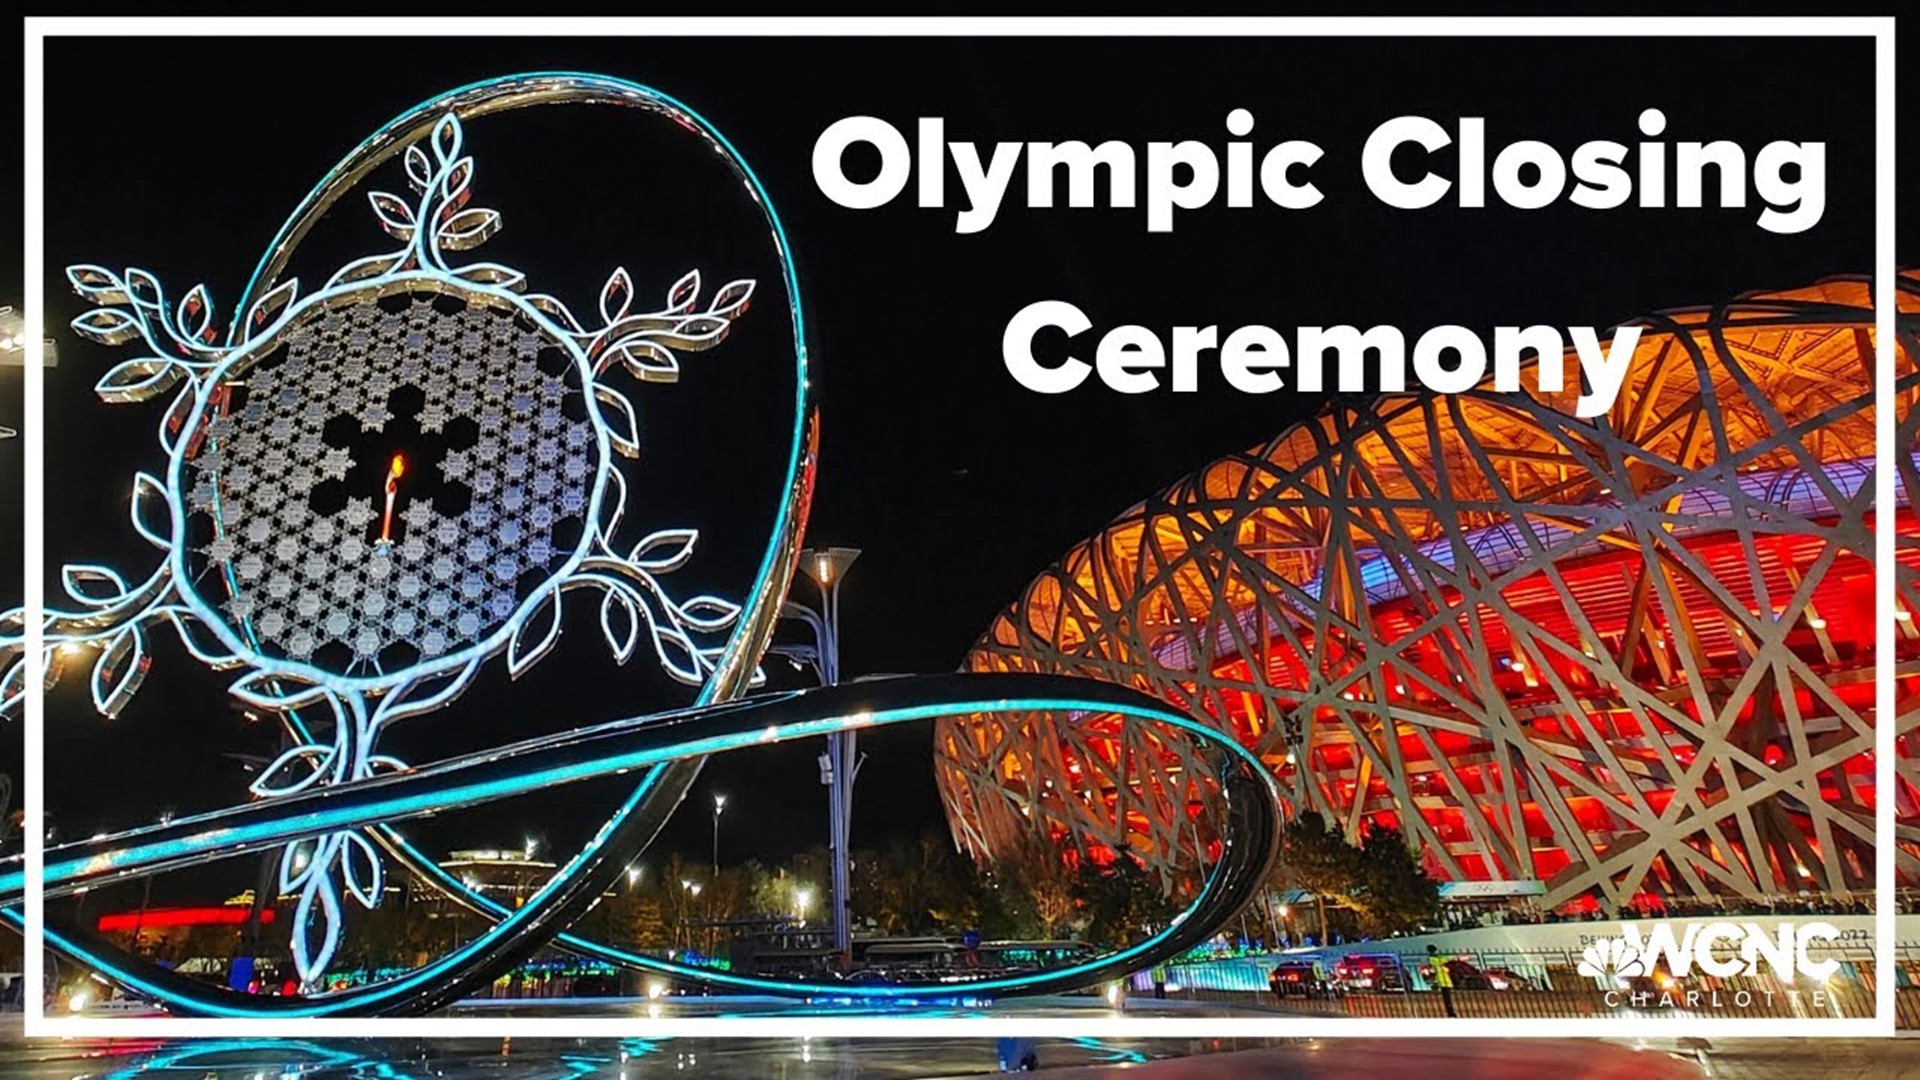 Watch the Beijing Olympic Closing Ceremony Sunday evening at 8 p.m. on NBC and WCNC Charlotte.